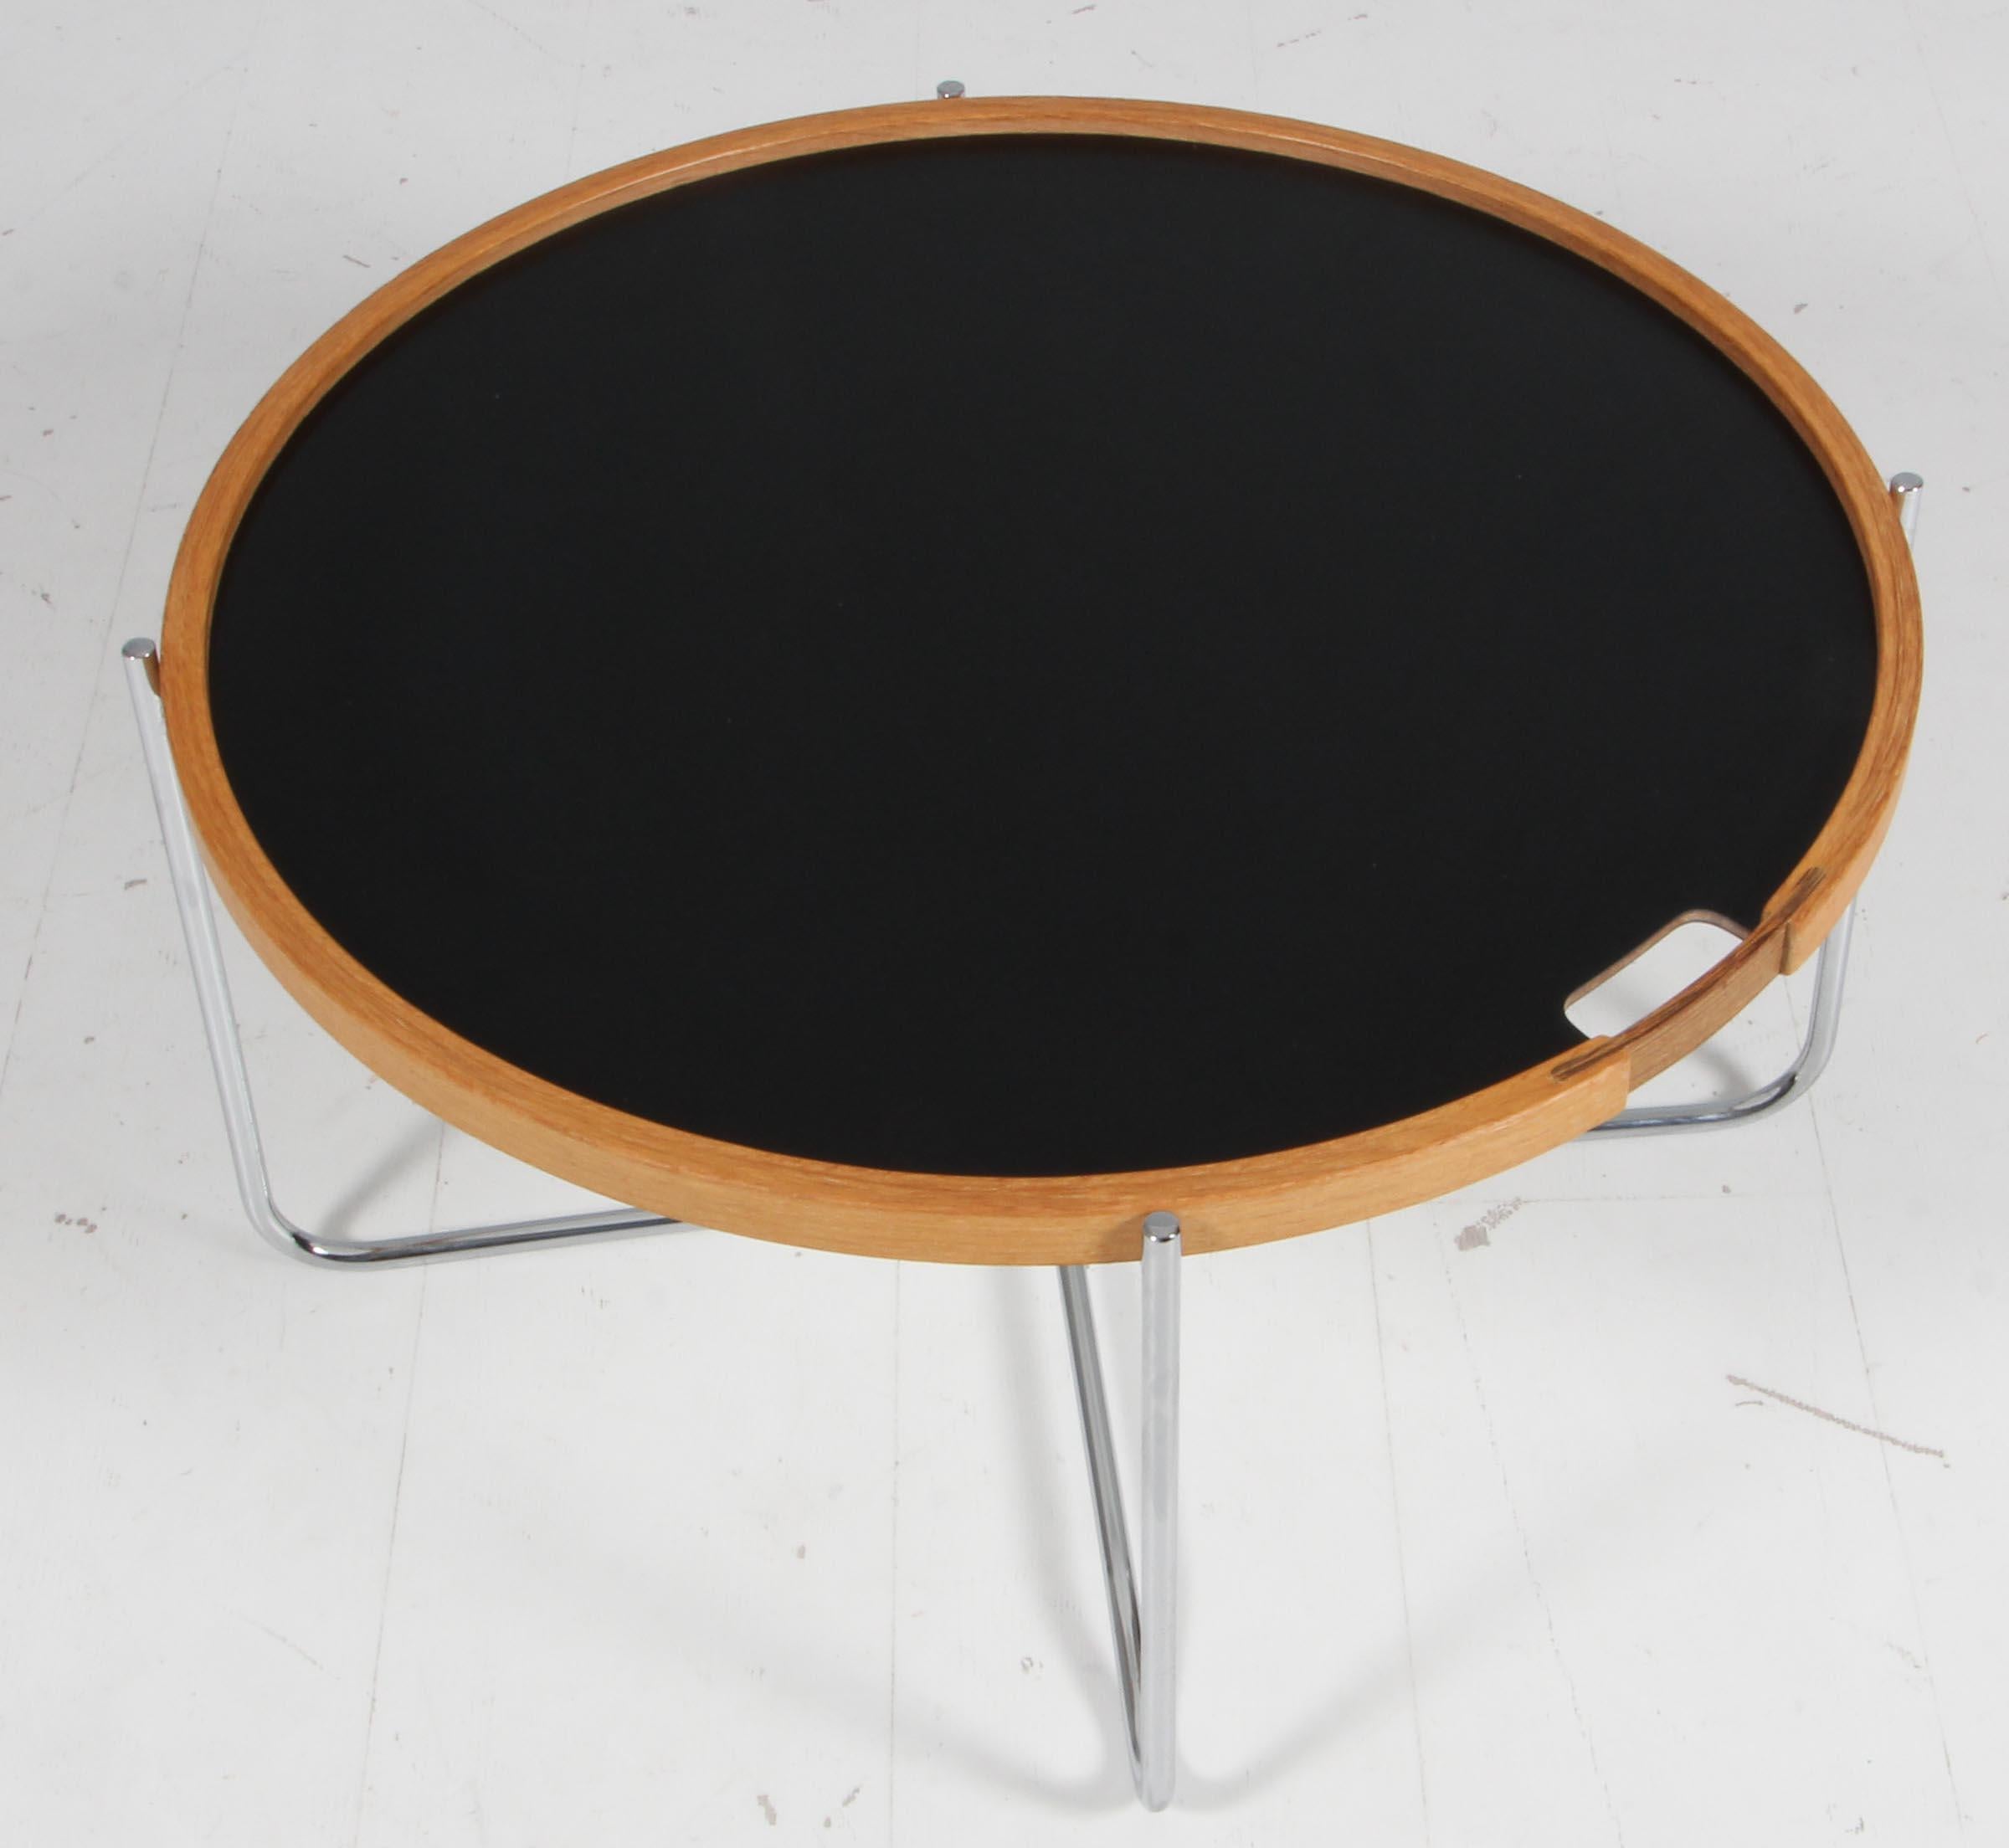 Hans J. Wegner tray table with frame of steel. Plate of black and white formica, oak sides with wenge handle.

Model GE453, made by Getama.